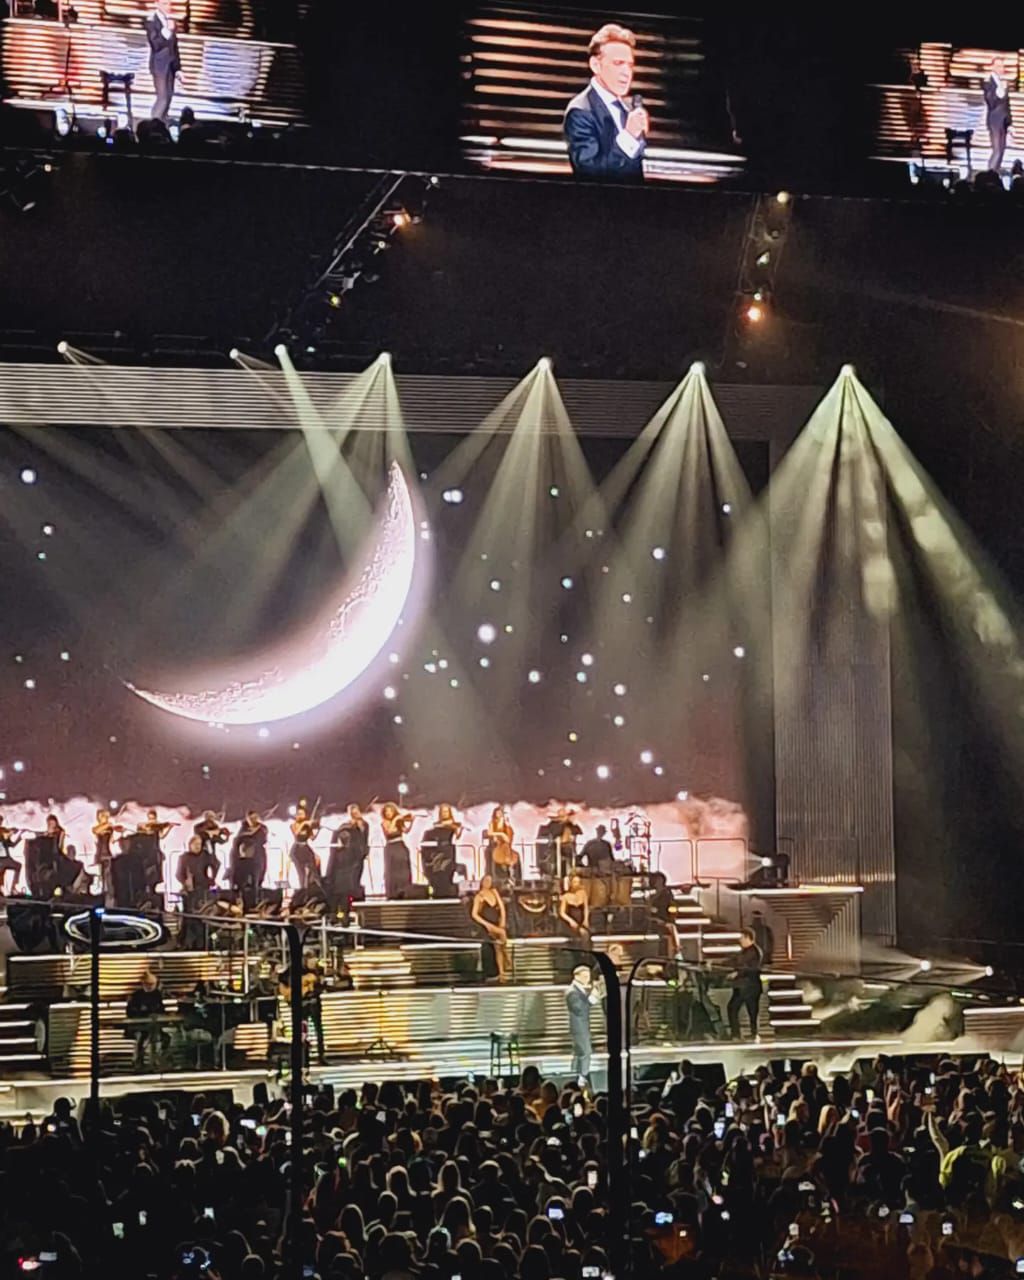 Another magical night for Luis Miguel and his fans